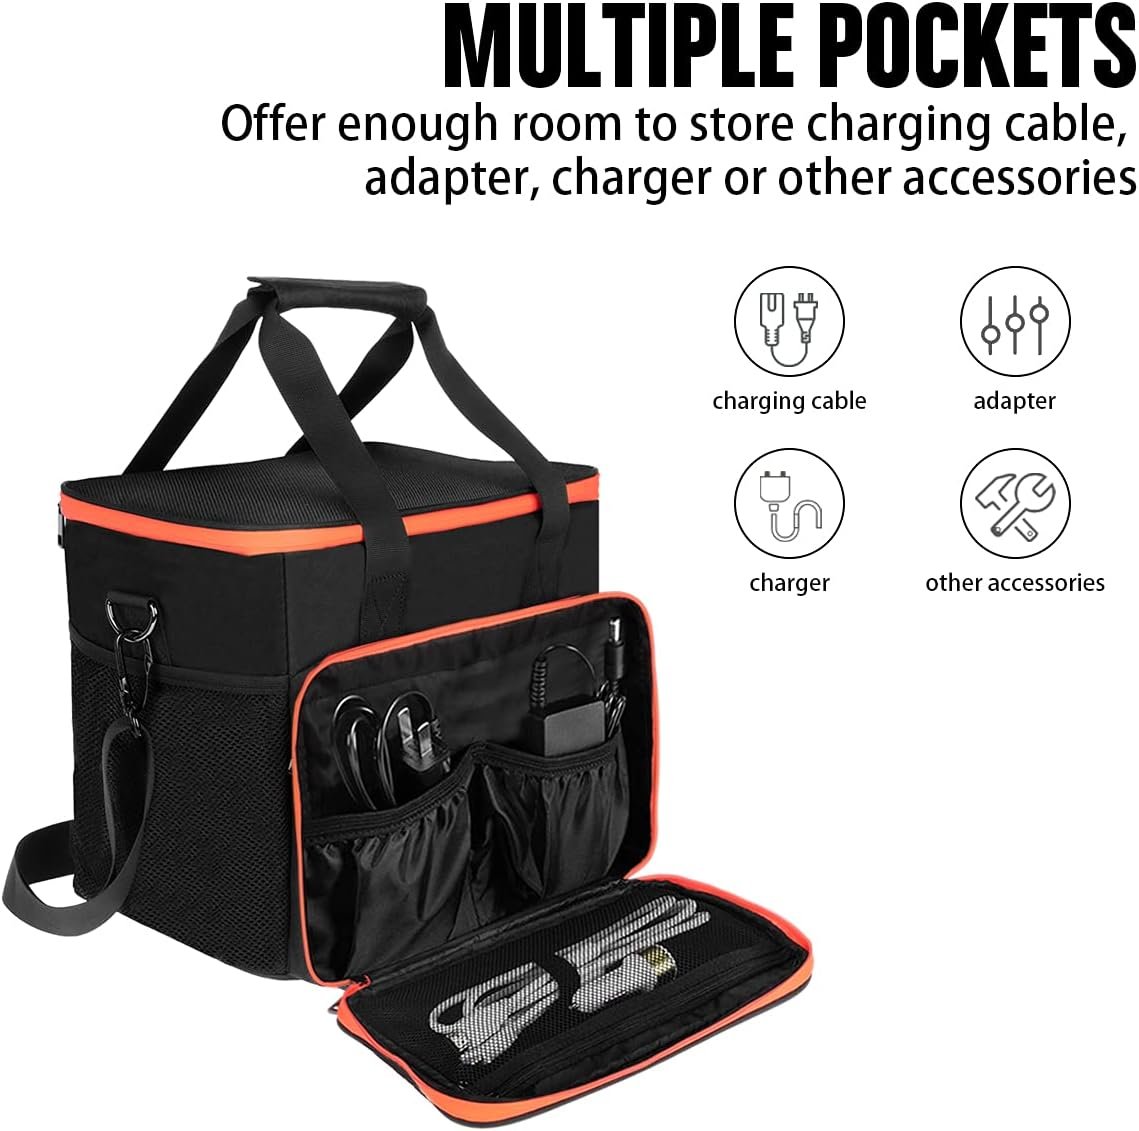 OUPES 1200W Solar Generator Carrying Bag Review